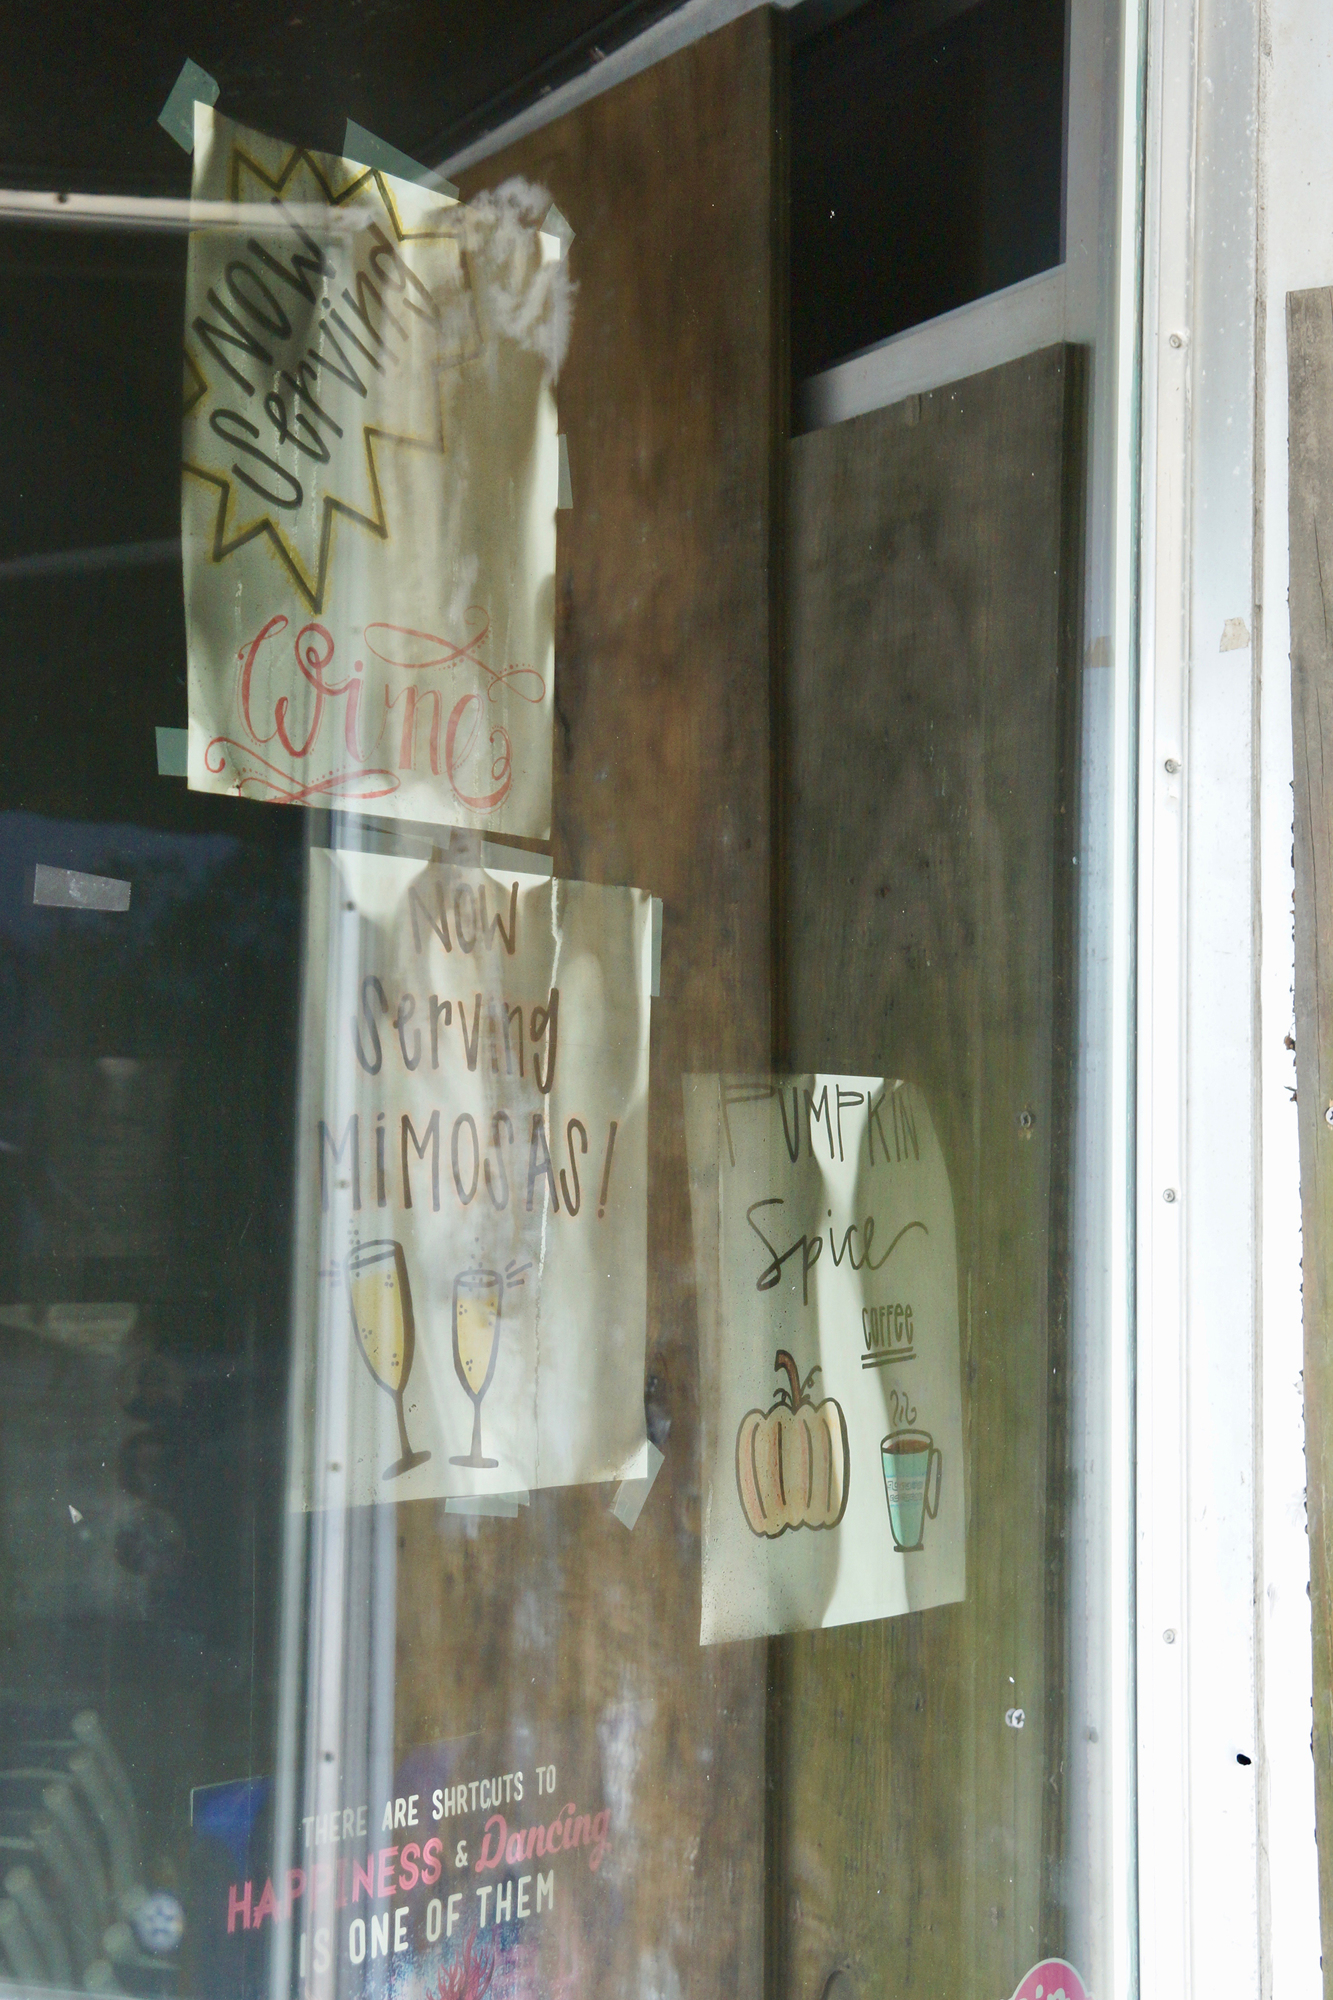 Smoke-stained signs in the window of Beach Dinner.